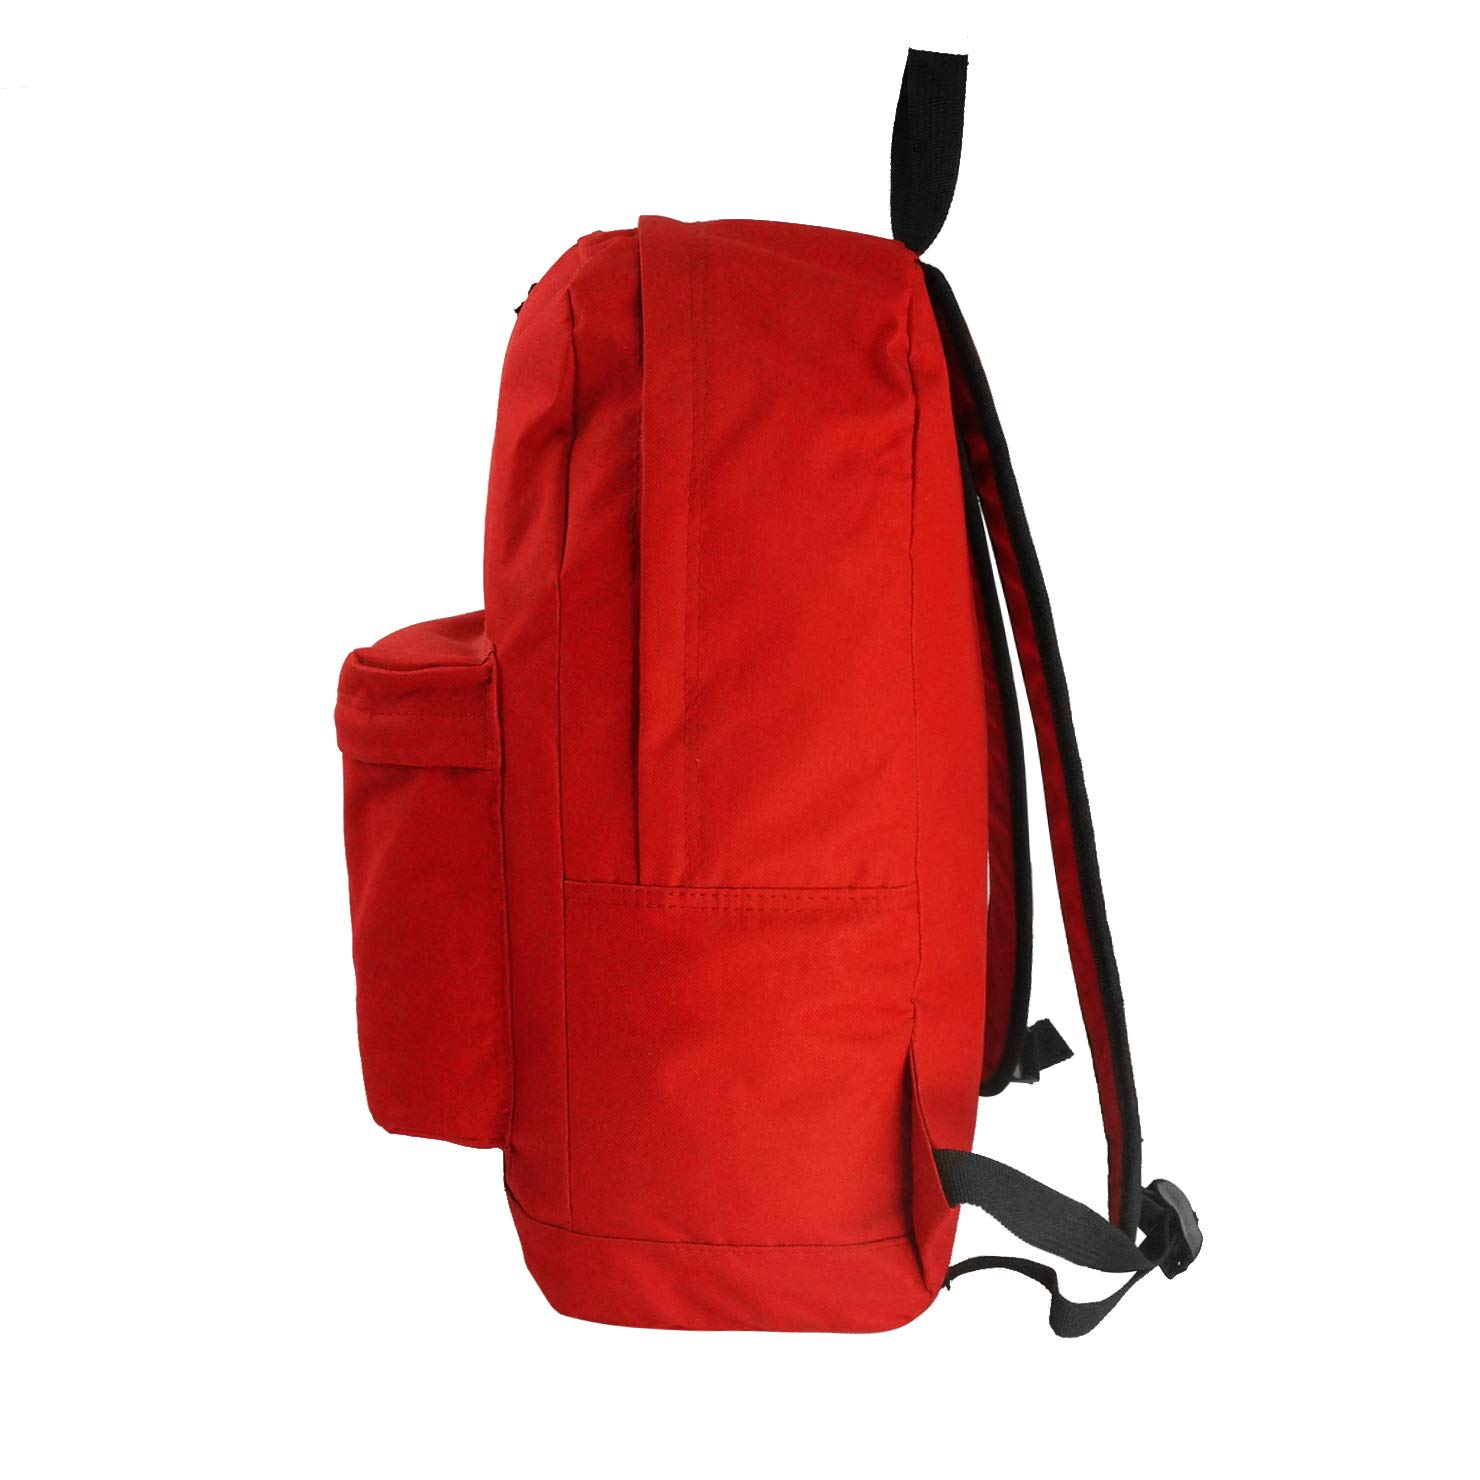 K-Cliffs Basic Emergency Survival Backpack Classic Simple School Book Bag Student Daily Daypack 18 Inch Red 18"x13"x16"